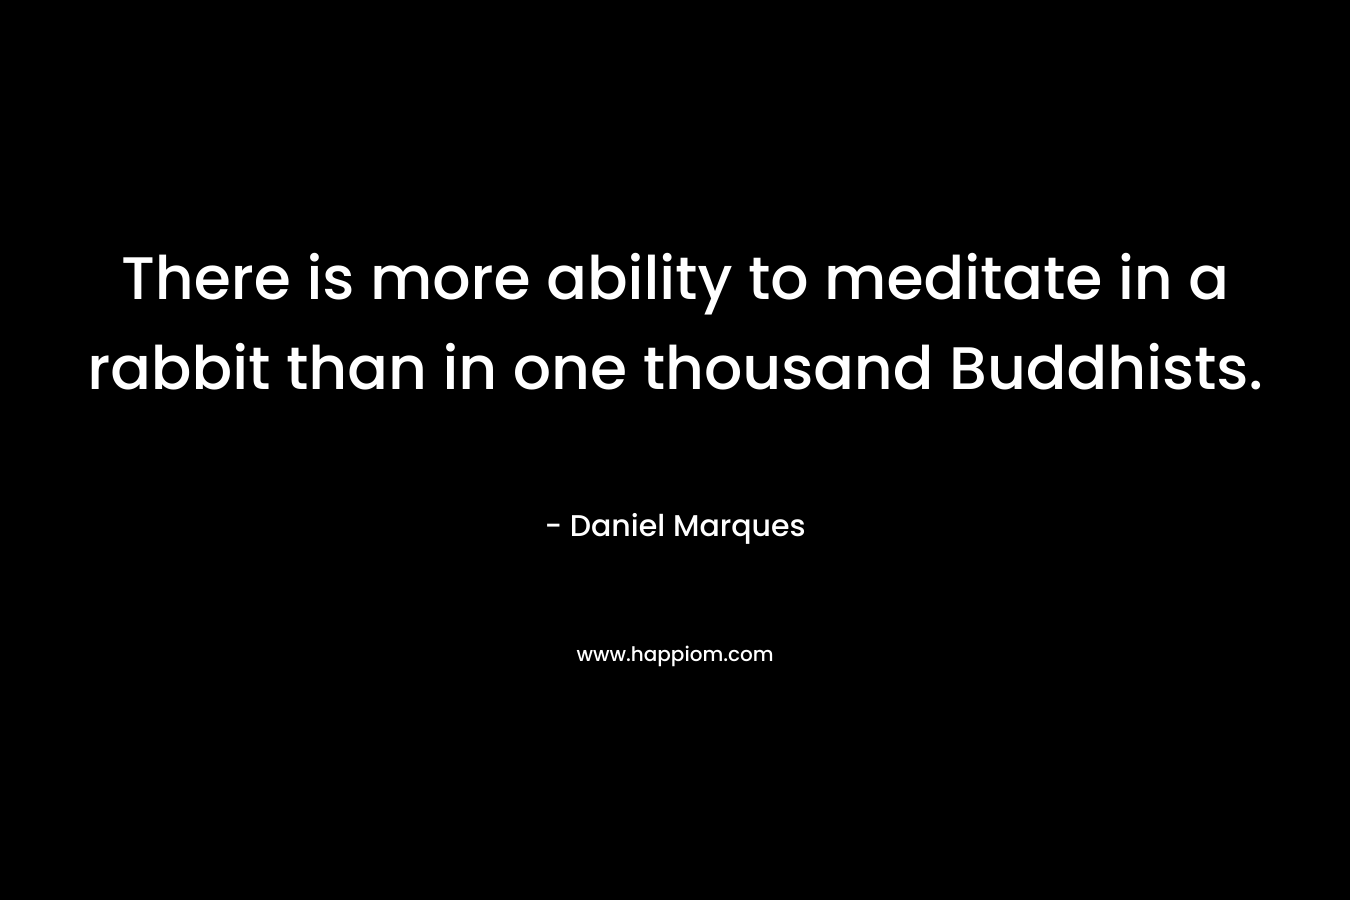 There is more ability to meditate in a rabbit than in one thousand Buddhists.